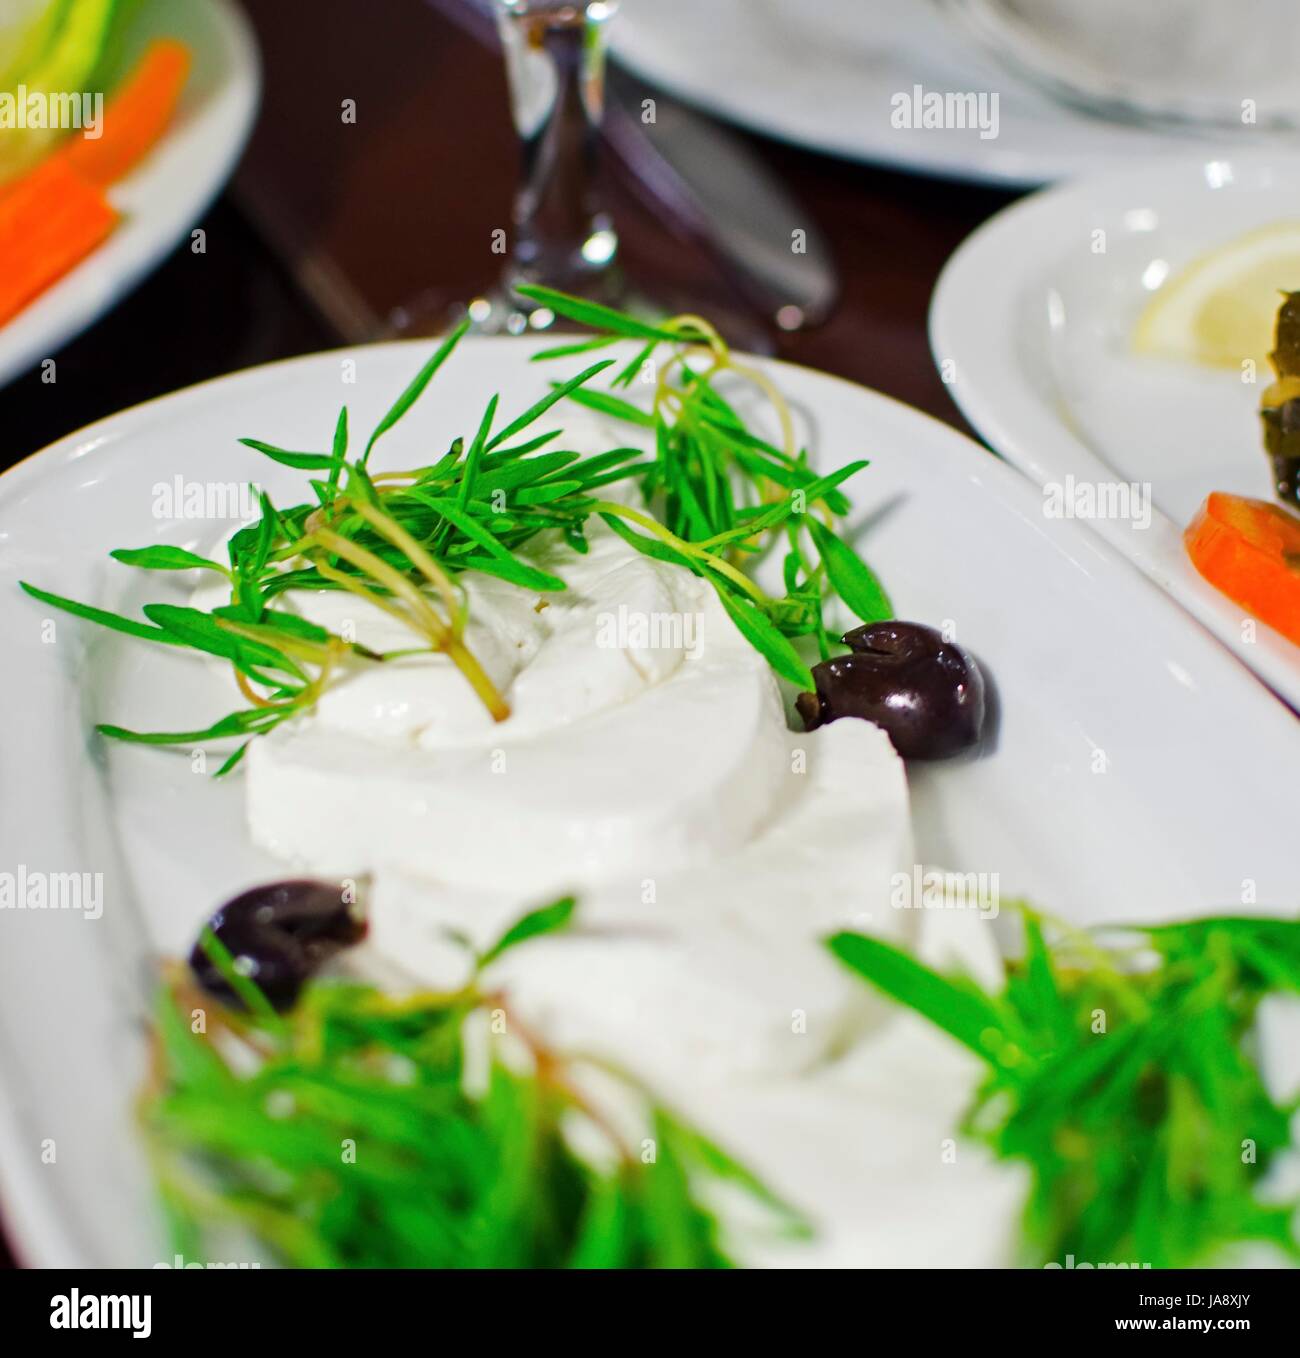 Lebanese food starter, labneh slices topped with thyme and olives. A photo of a very typical dish of Lebanon and Mediterranean cuisine. Stock Photo